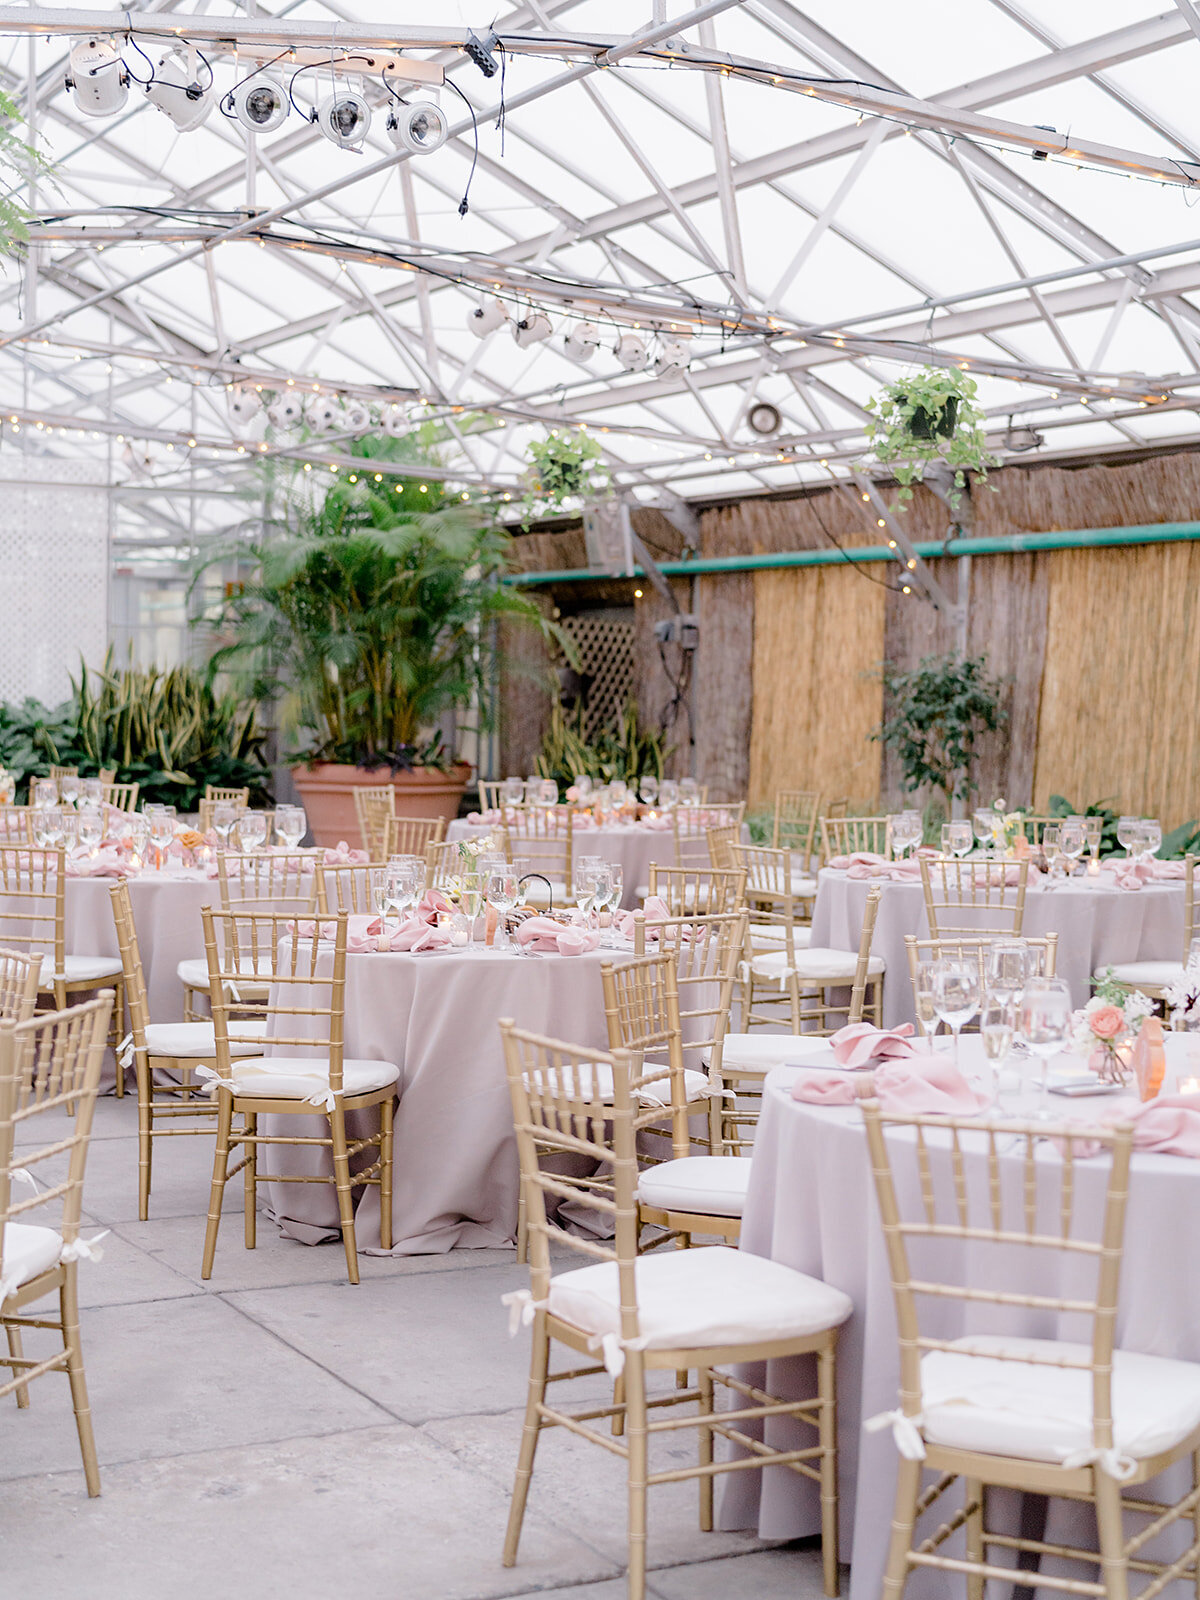 Melissa and Keith - Fairmount Park Horticulture Center - Magi Fisher - 748